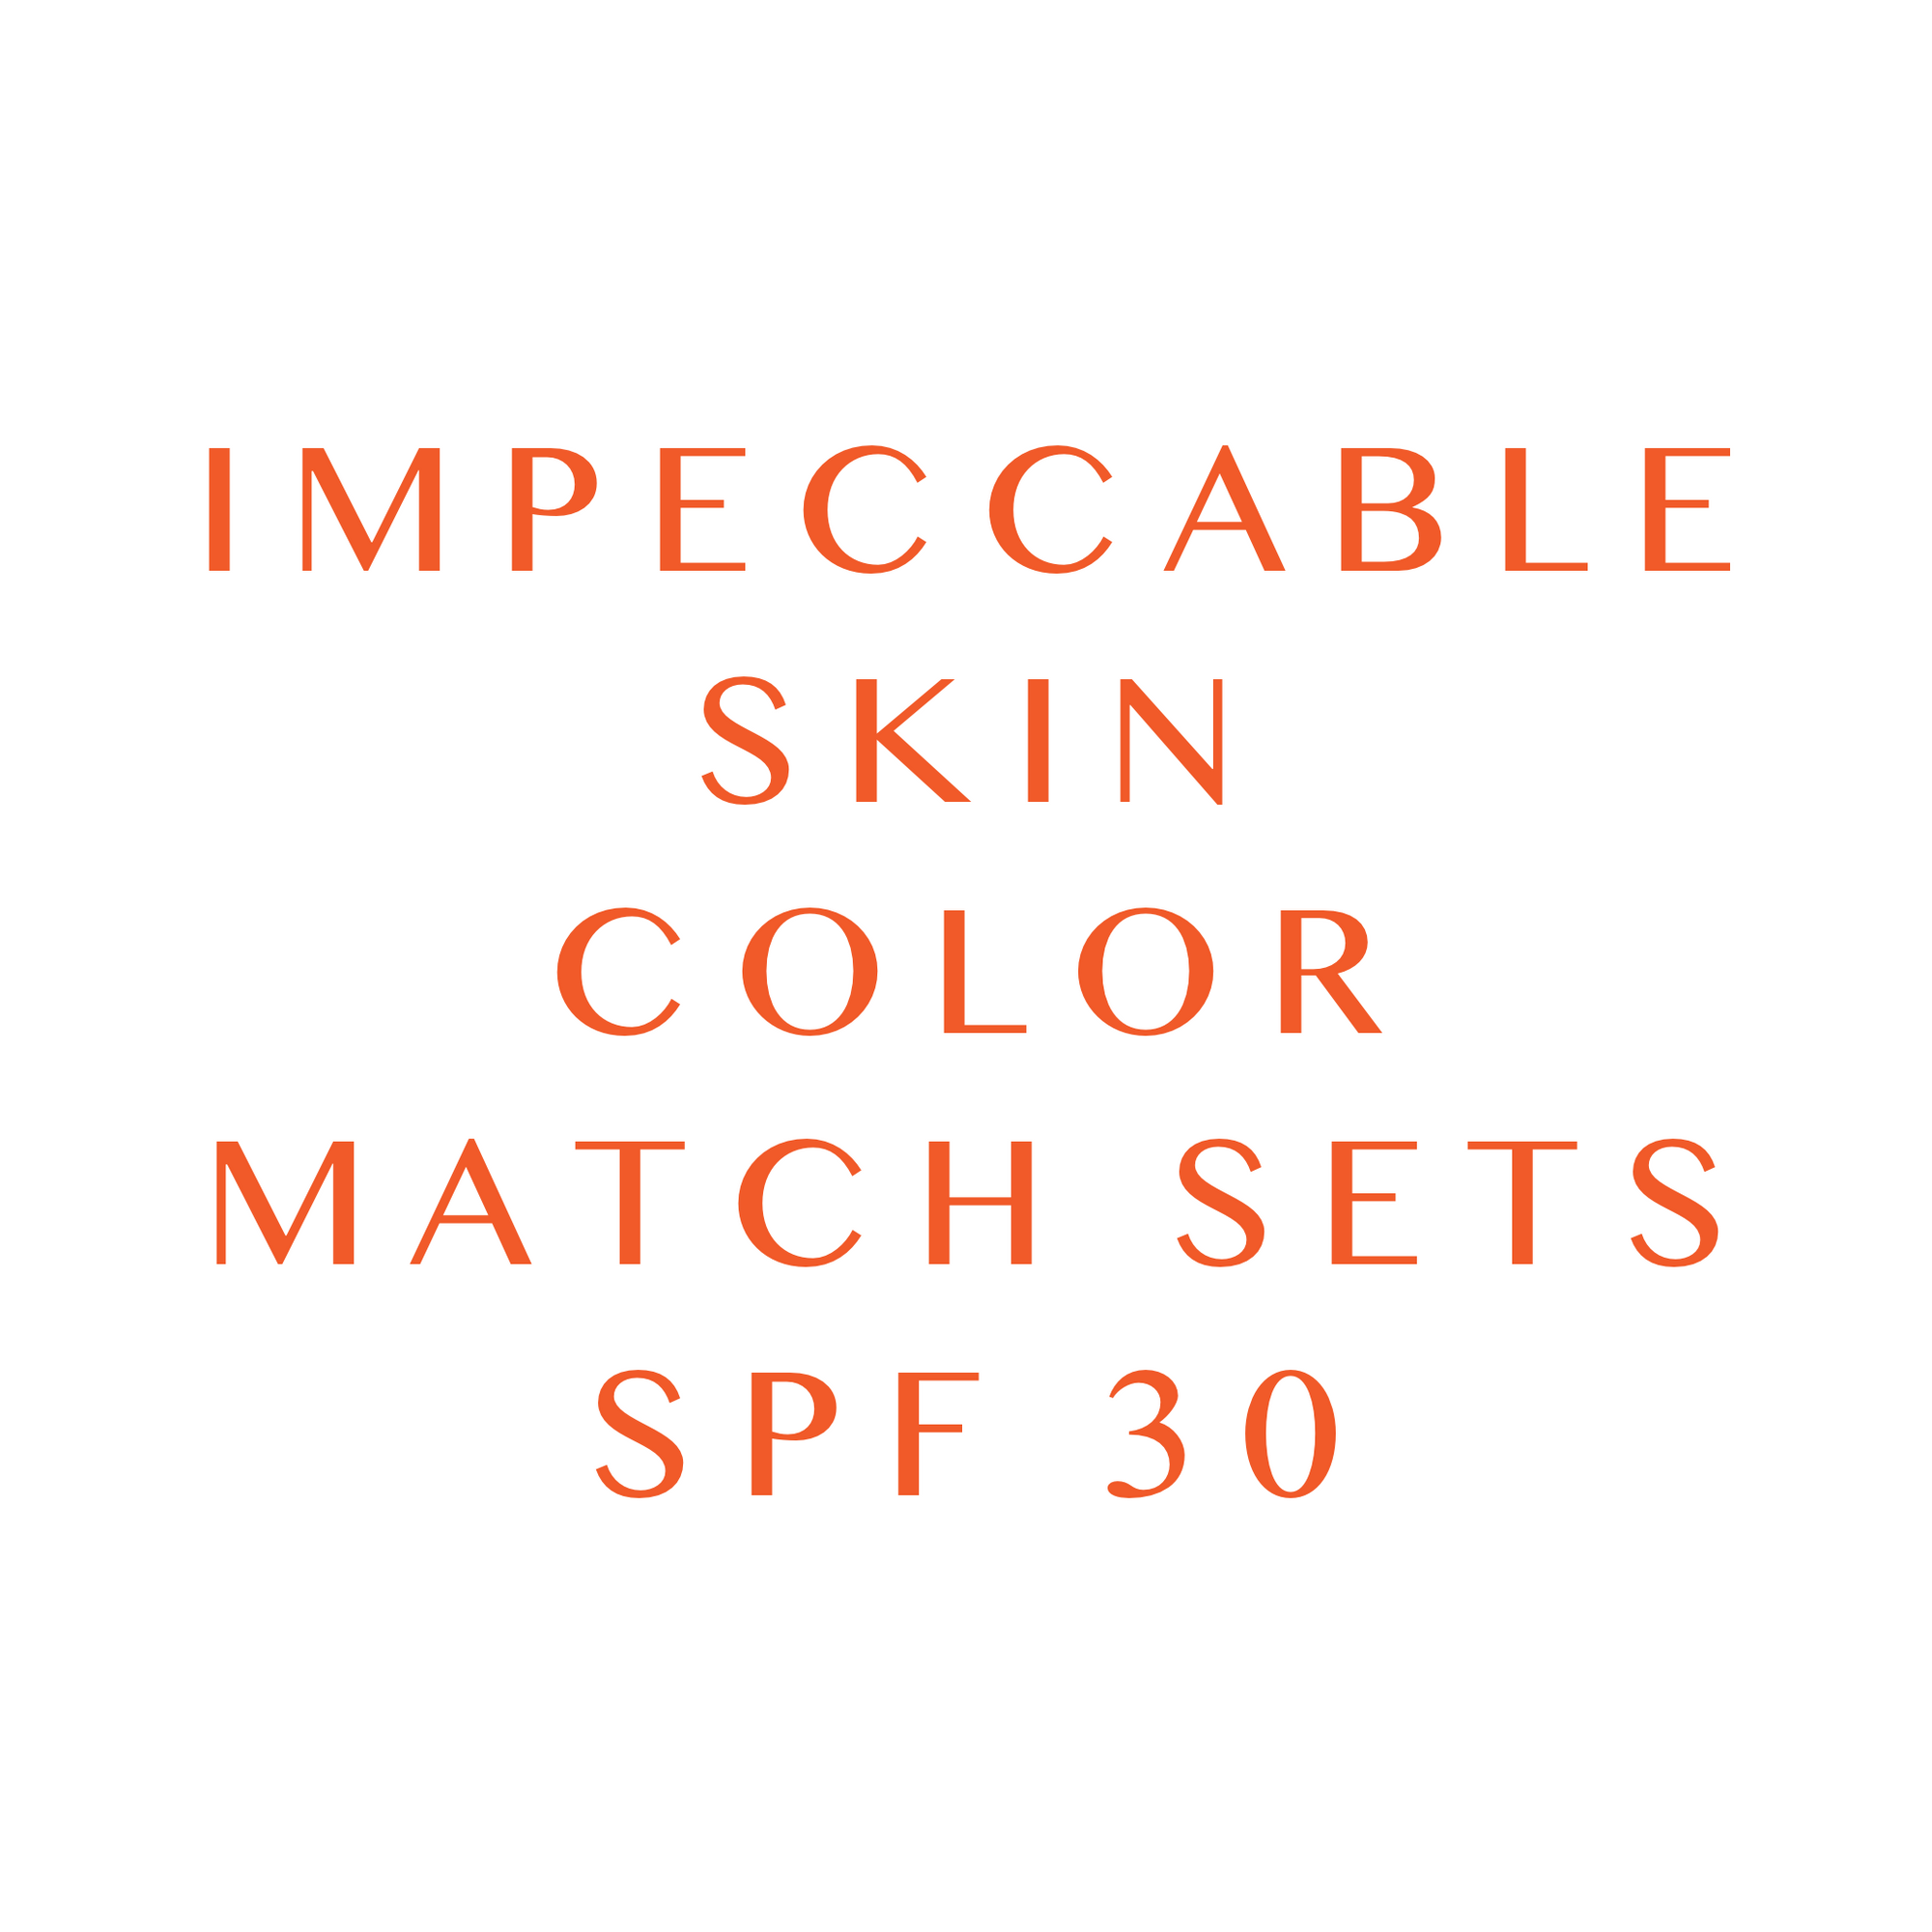 This is an image indicating you can purchase Impeccable Skin color match sets here. There are 3 options.